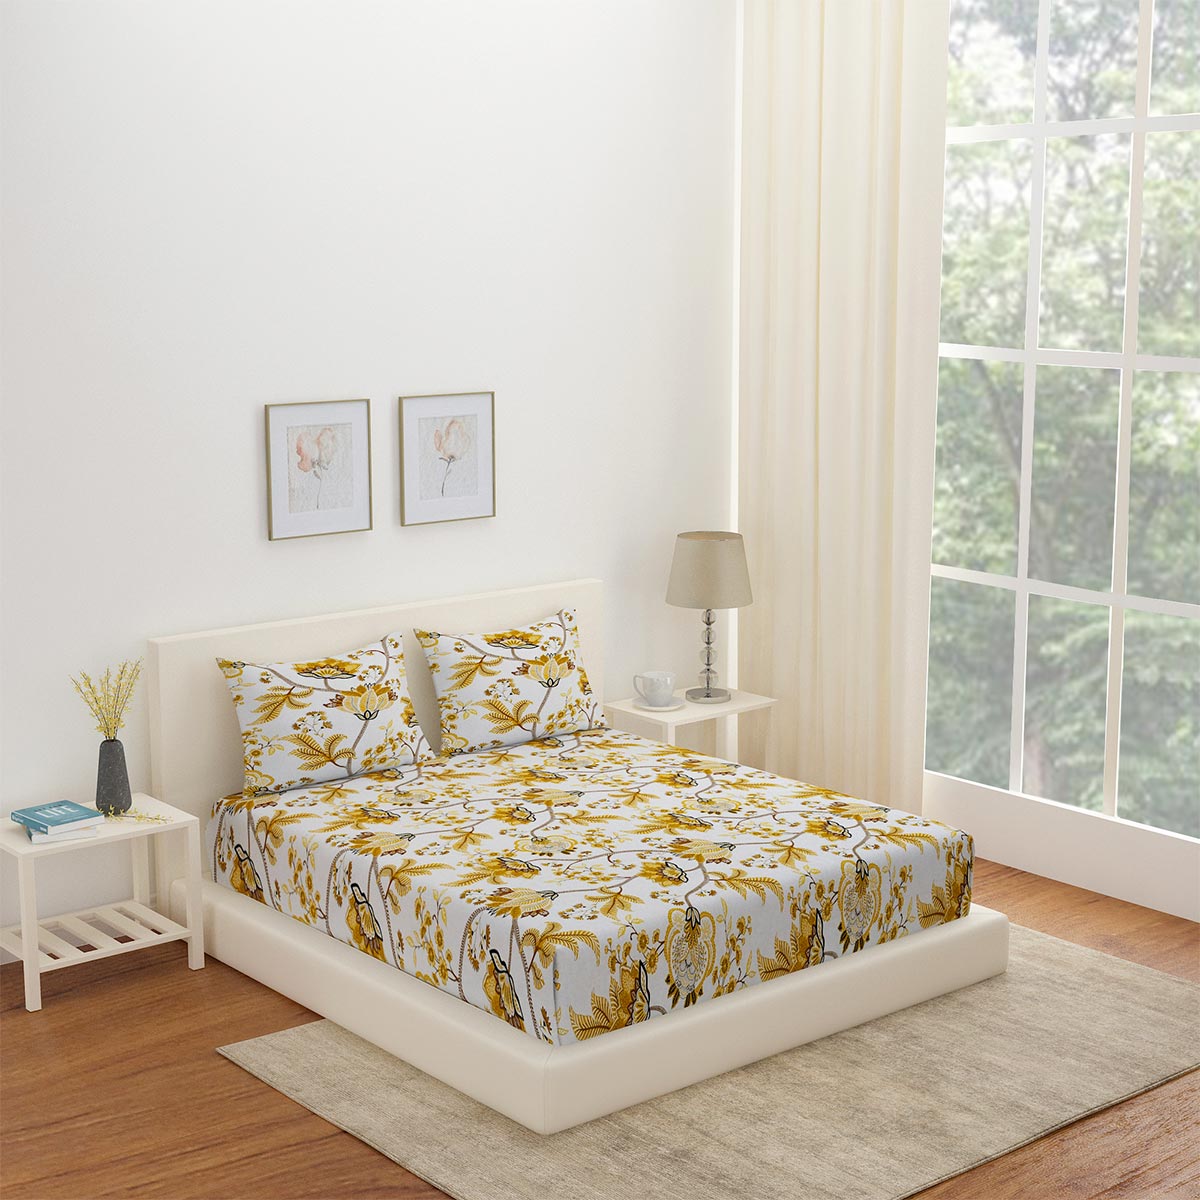 Arias Floral Cotton King Bedsheet With 2 Pillow Covers (Yellow)